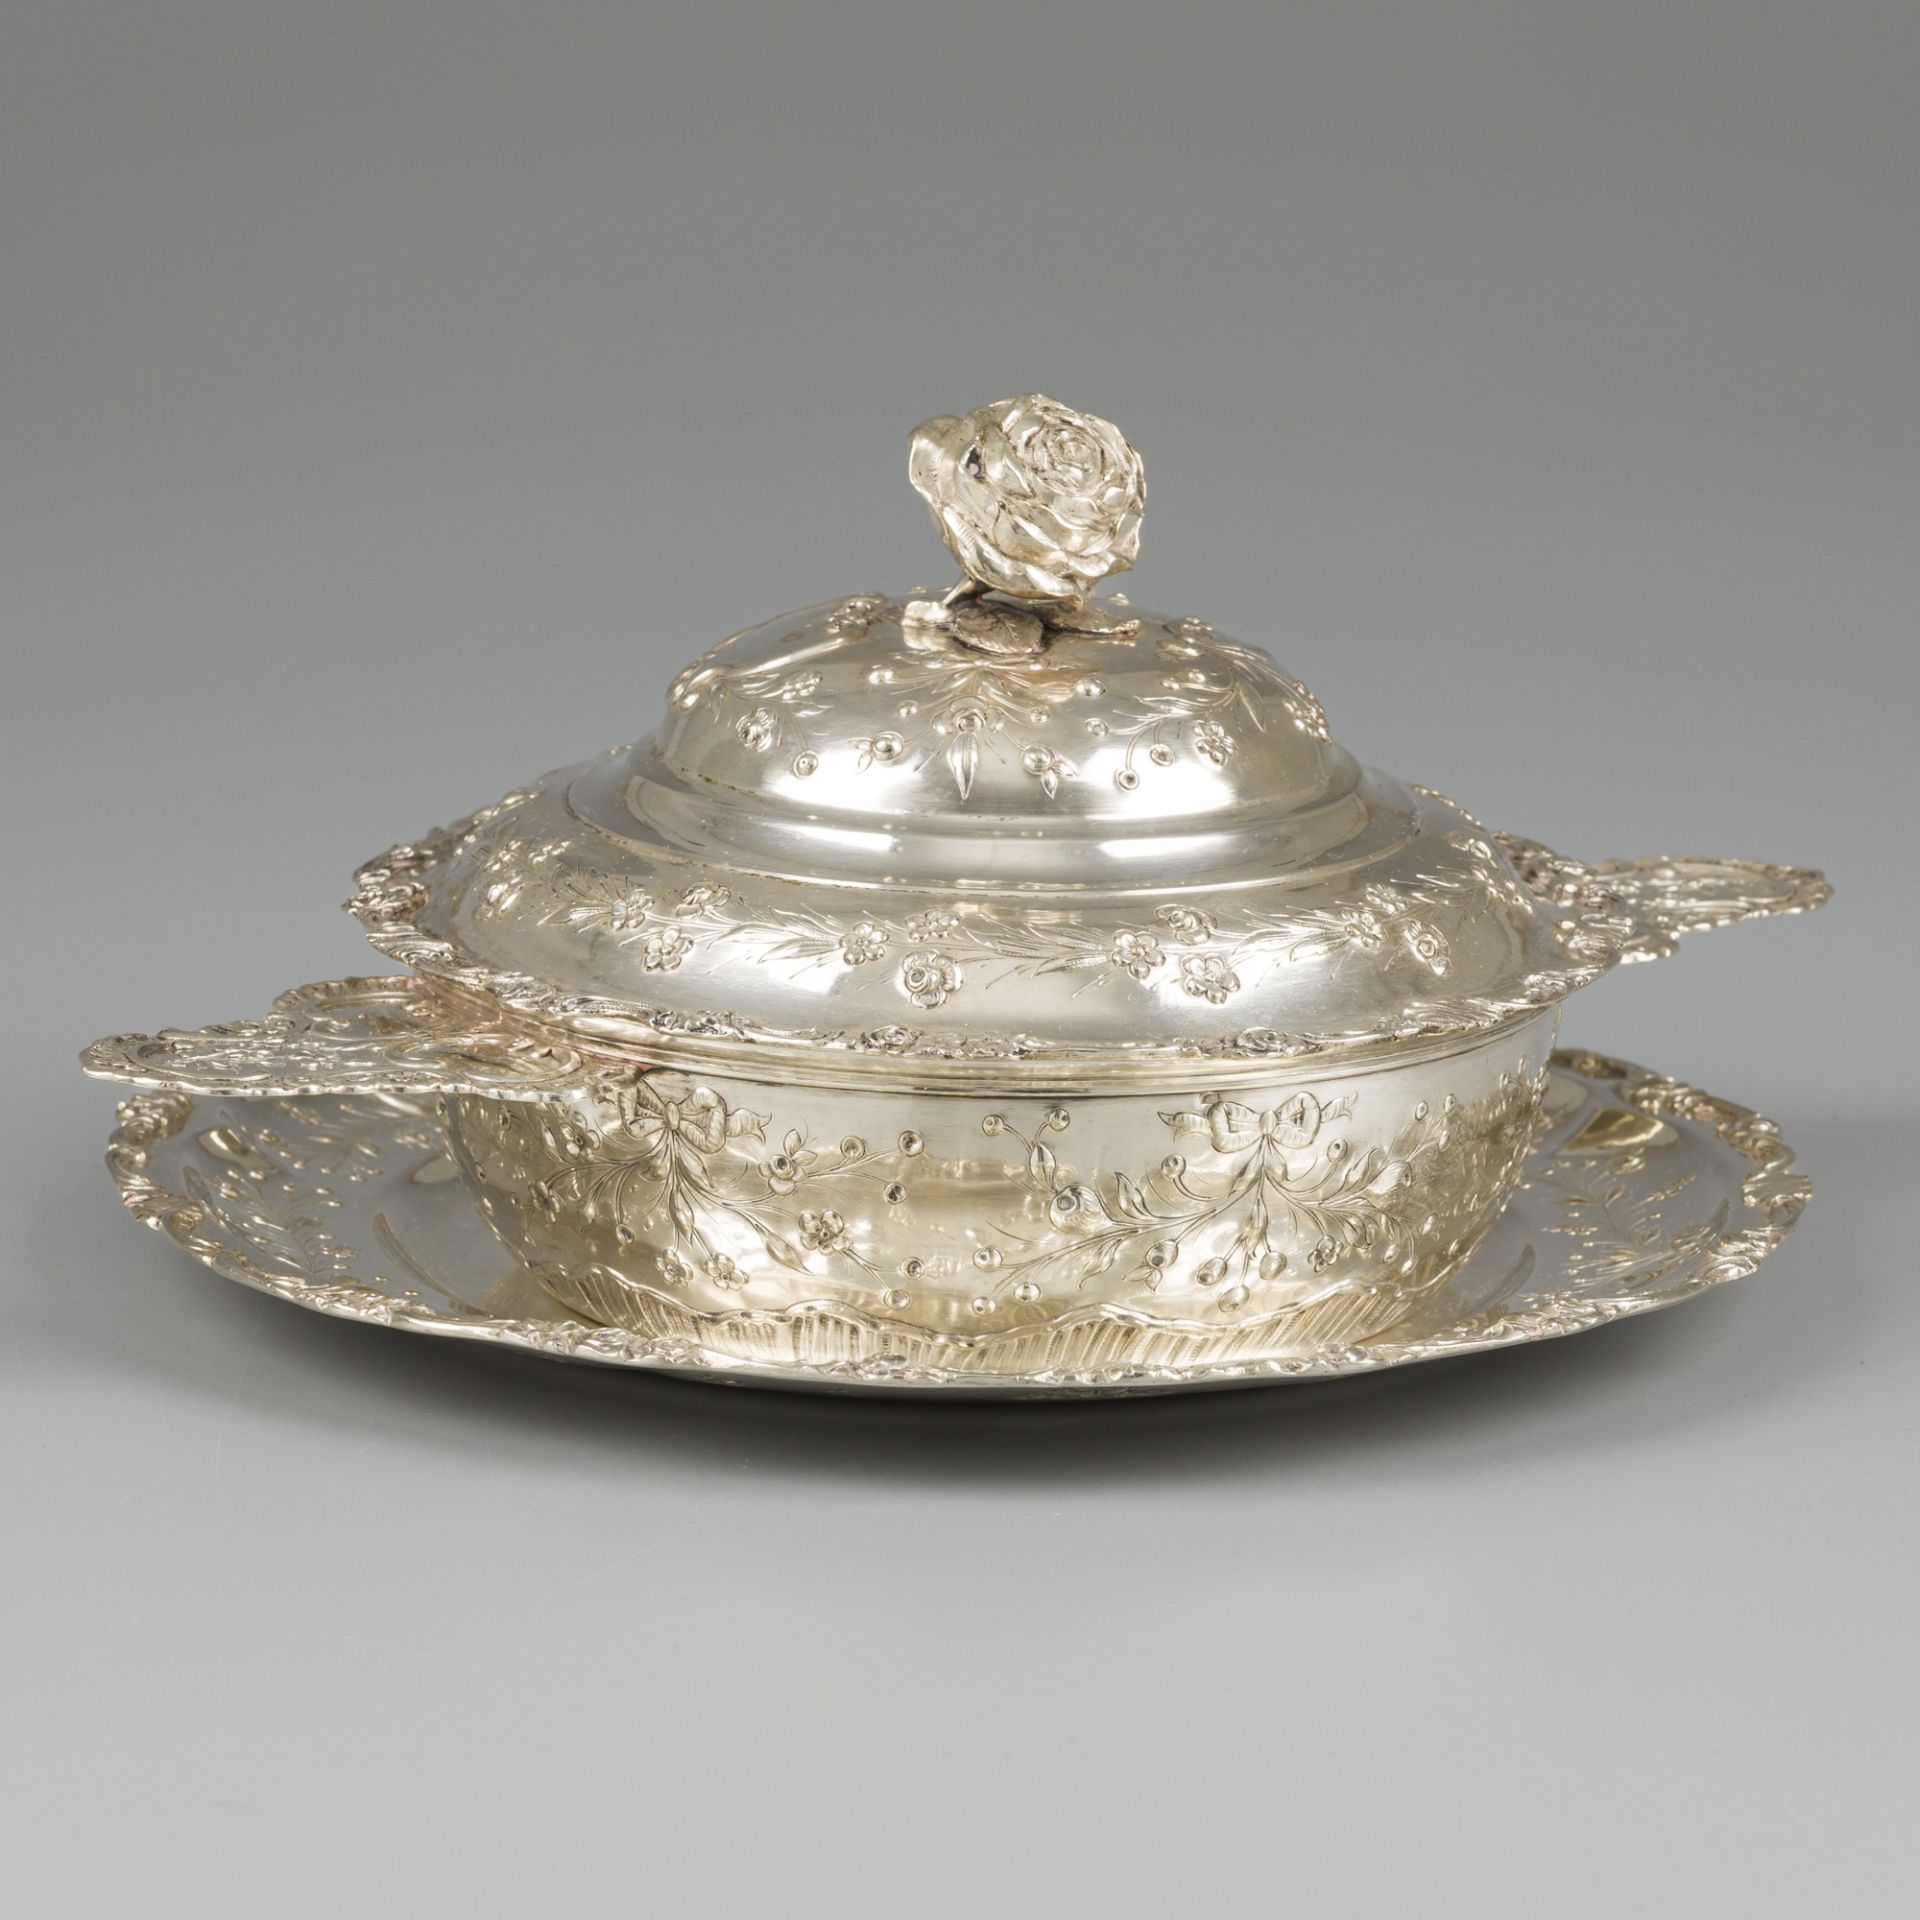 Covered dish with saucer, silver.